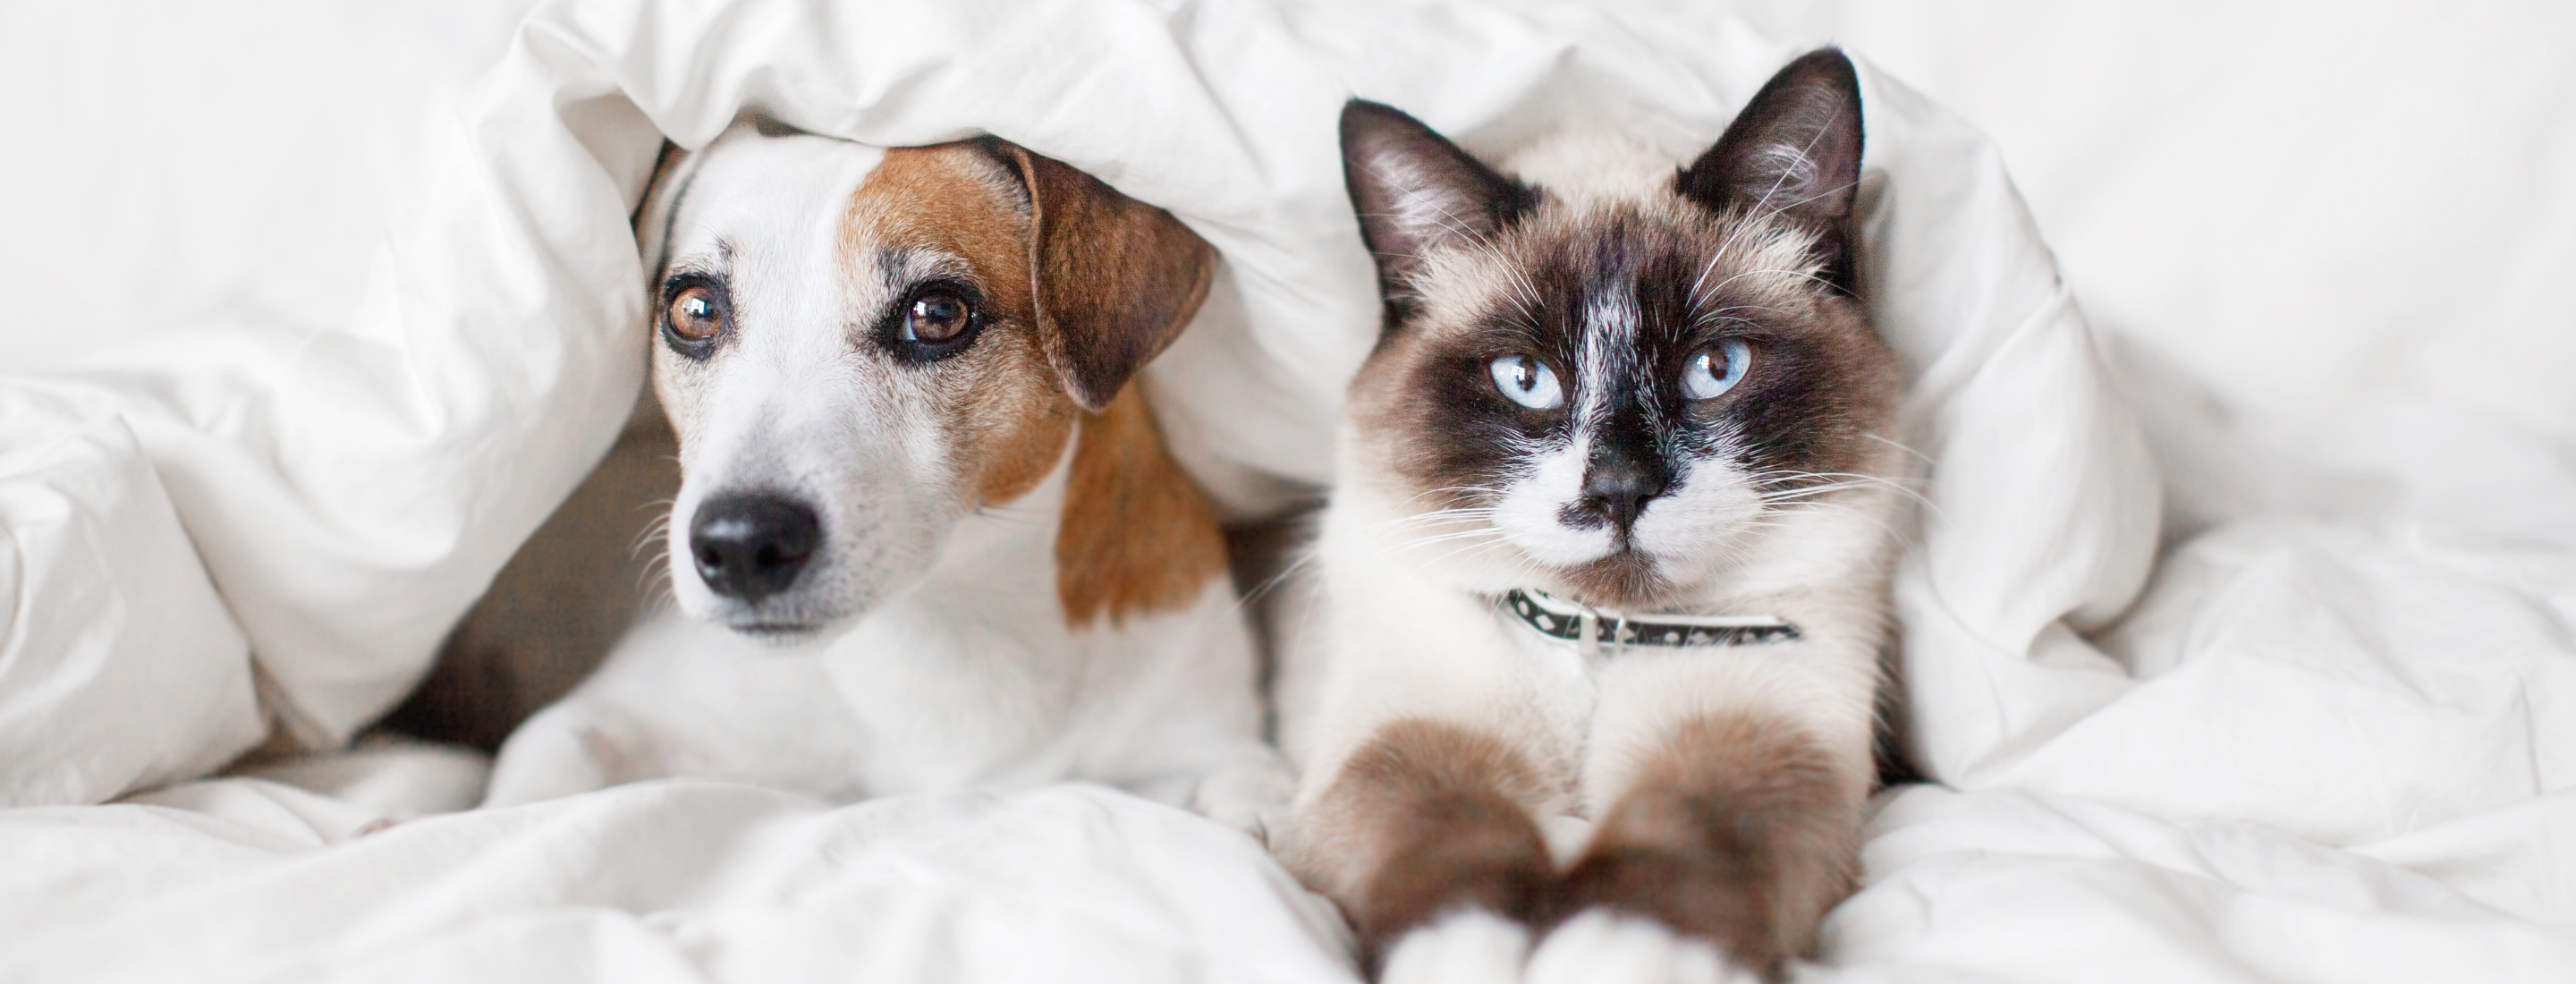 5 Tips to Keep Your Pet Warm in Winter